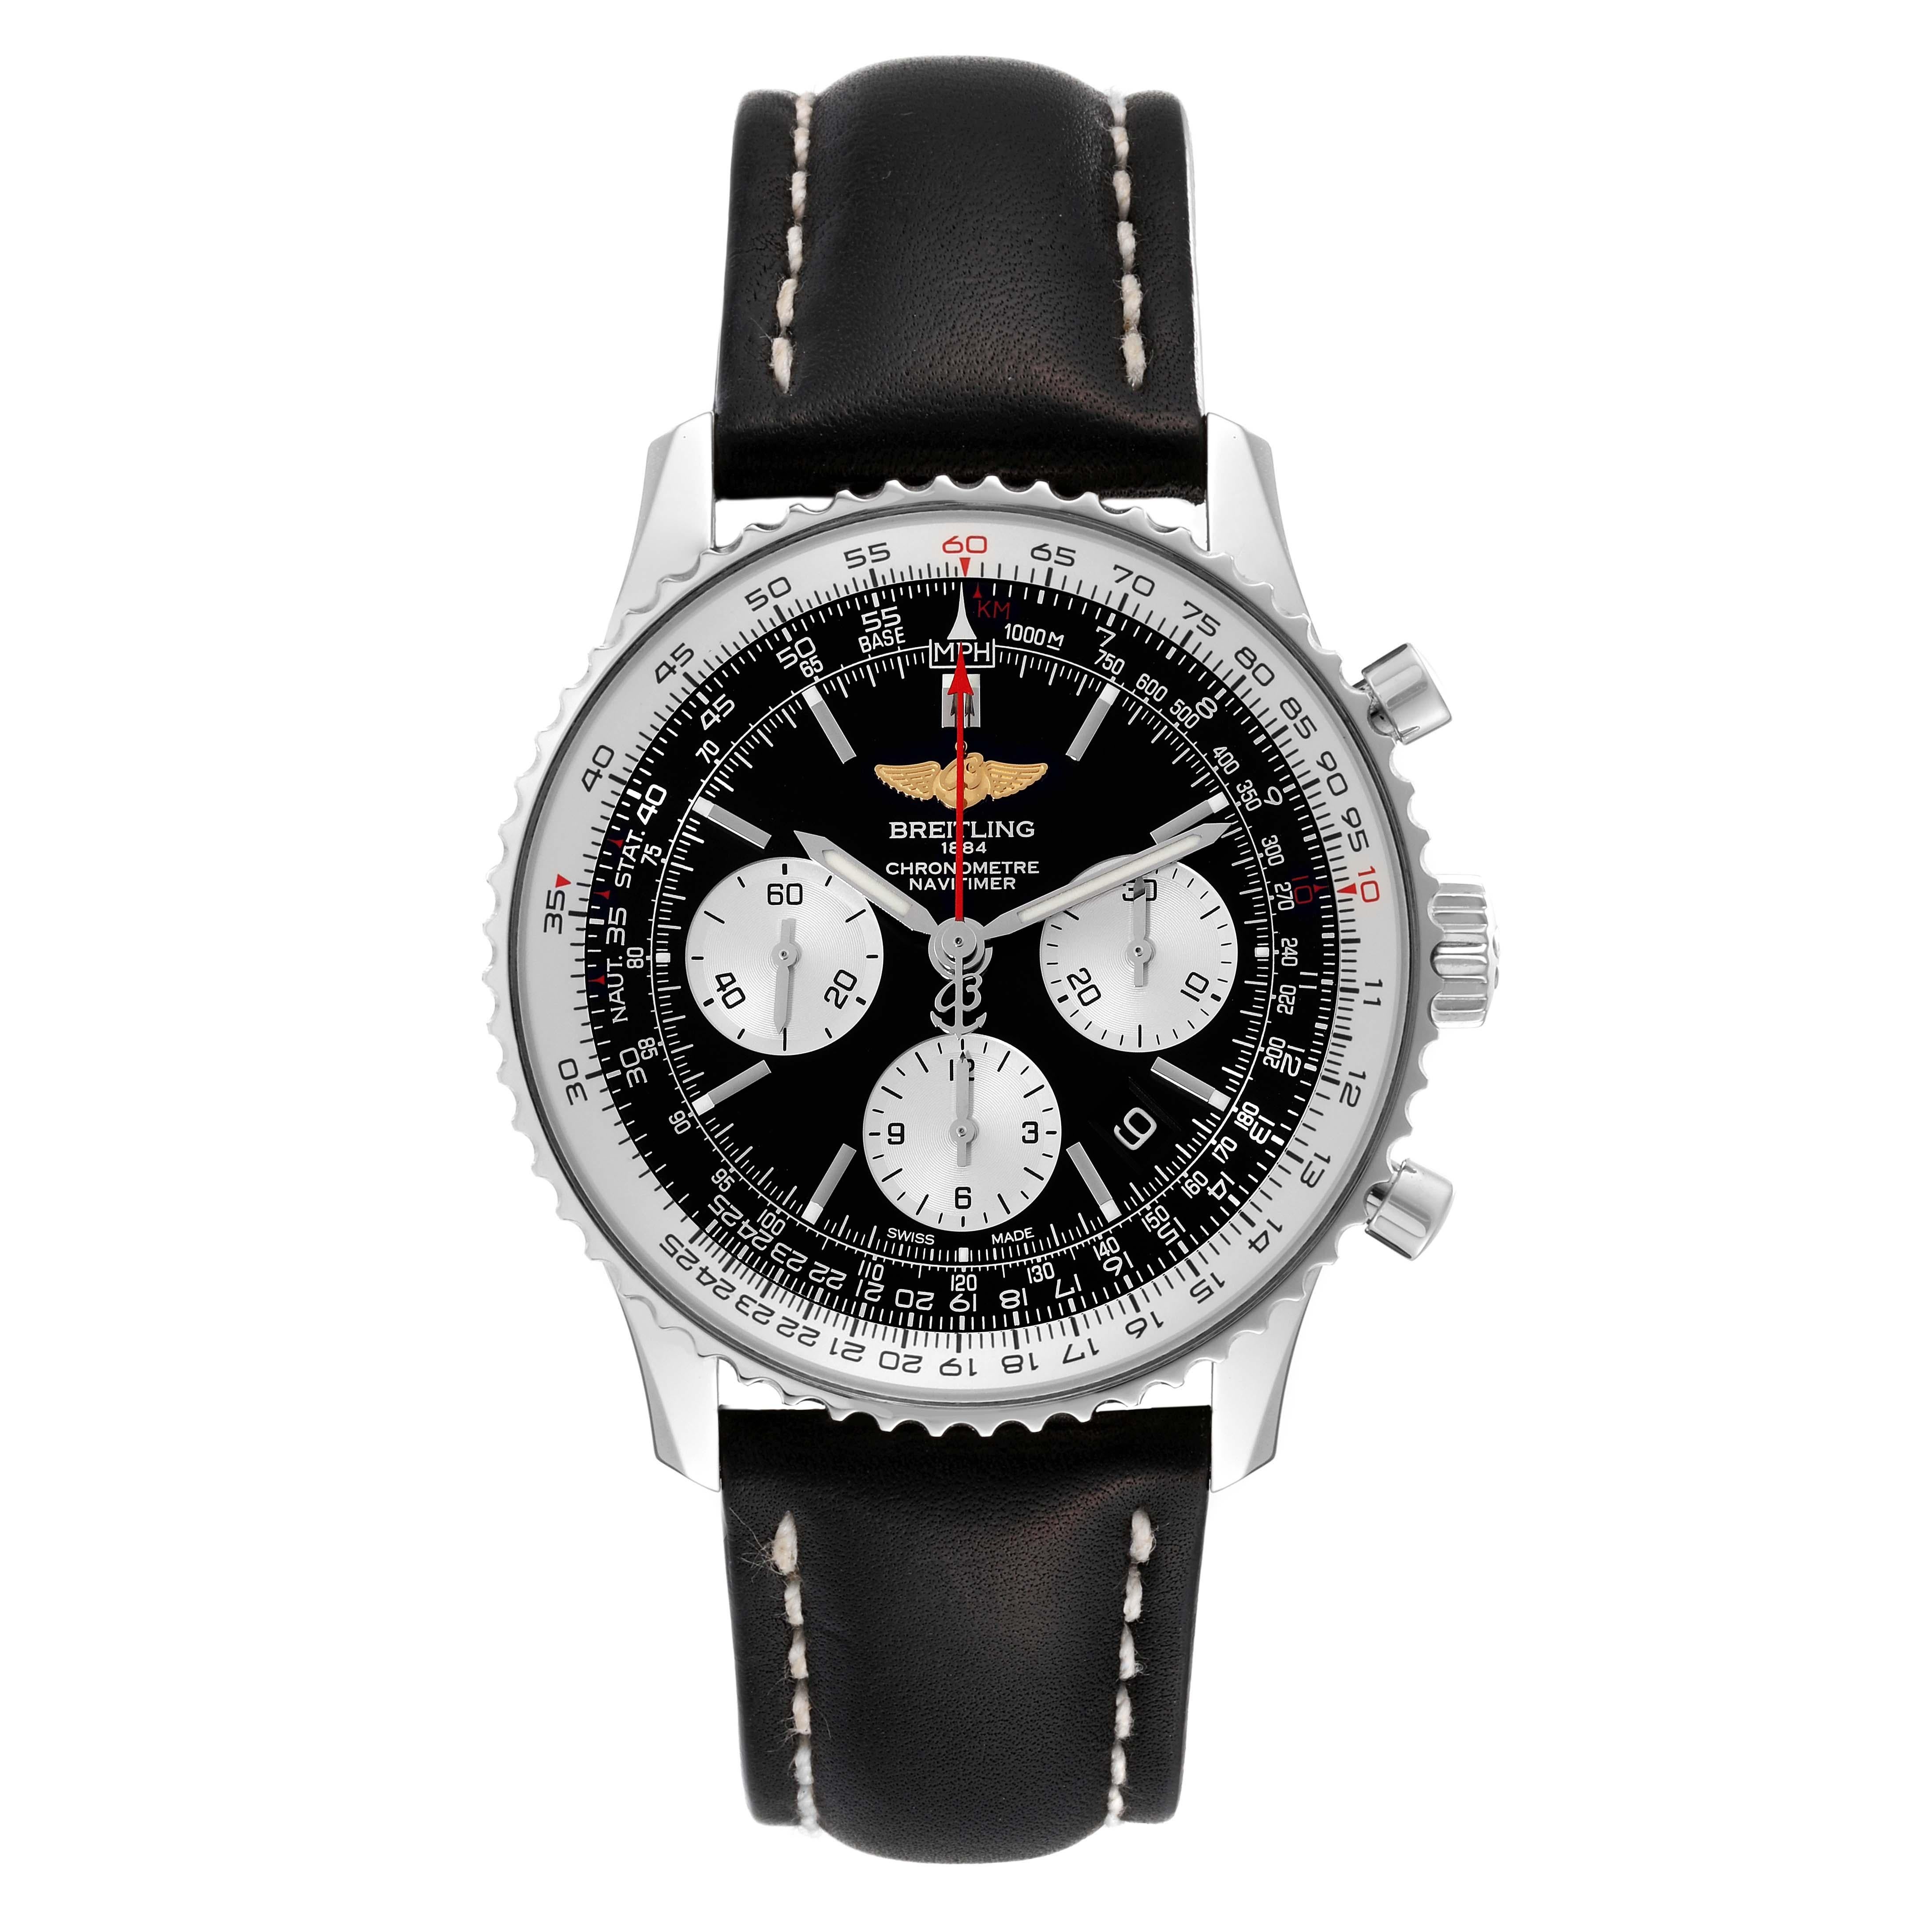 Breitling Navitimer 01 Black Dial Steel Mens Watch AB0120 Box Card. Automatic self-winding officially certified chronometer movement. Chronograph function. Stainless steel case 43.0 mm in diameter. Breitling logo on the crown. Stainless steel